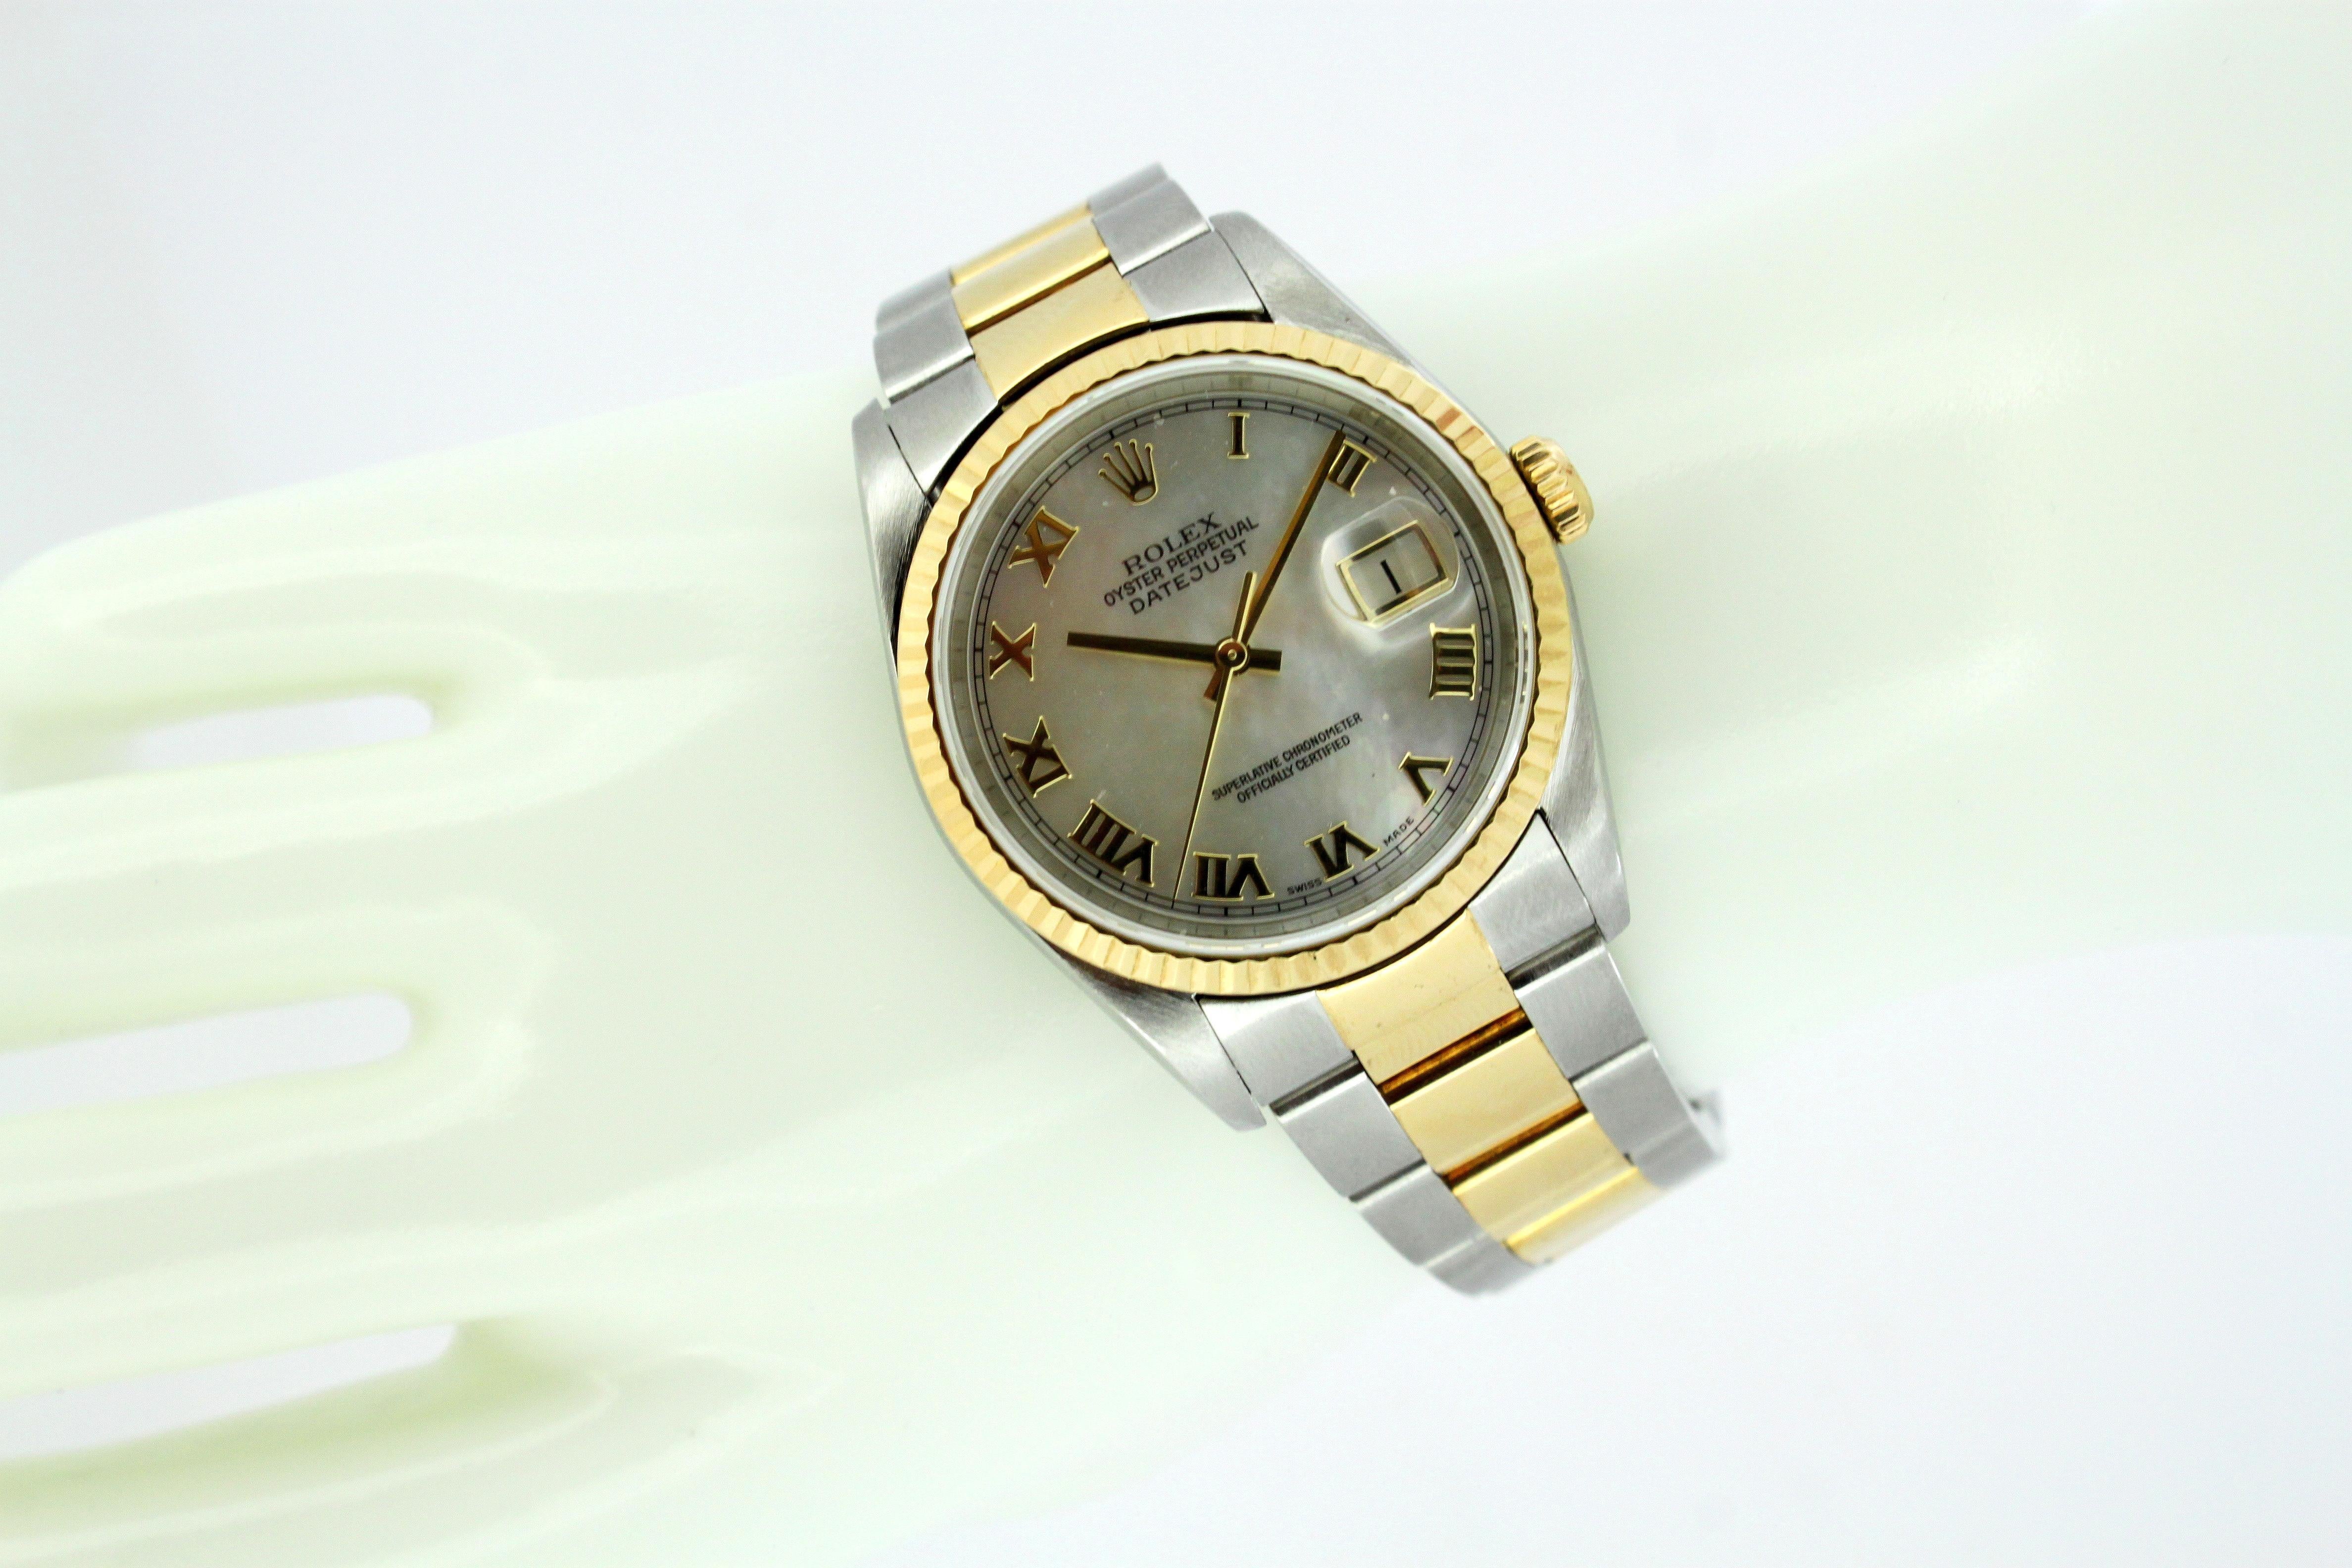 Rolex - DateJust - 16233 - Men - 1970's

Gender:	Men
Model : Oyster Perpetual DateJust
Case Diameter : 36 mm
Movement: Automatic
Watchband Material: 18K Gold & Steel
Case material : 18K Gold & Steel
Display Type:	Analogue	
Age: 1970's
Dial: Mother